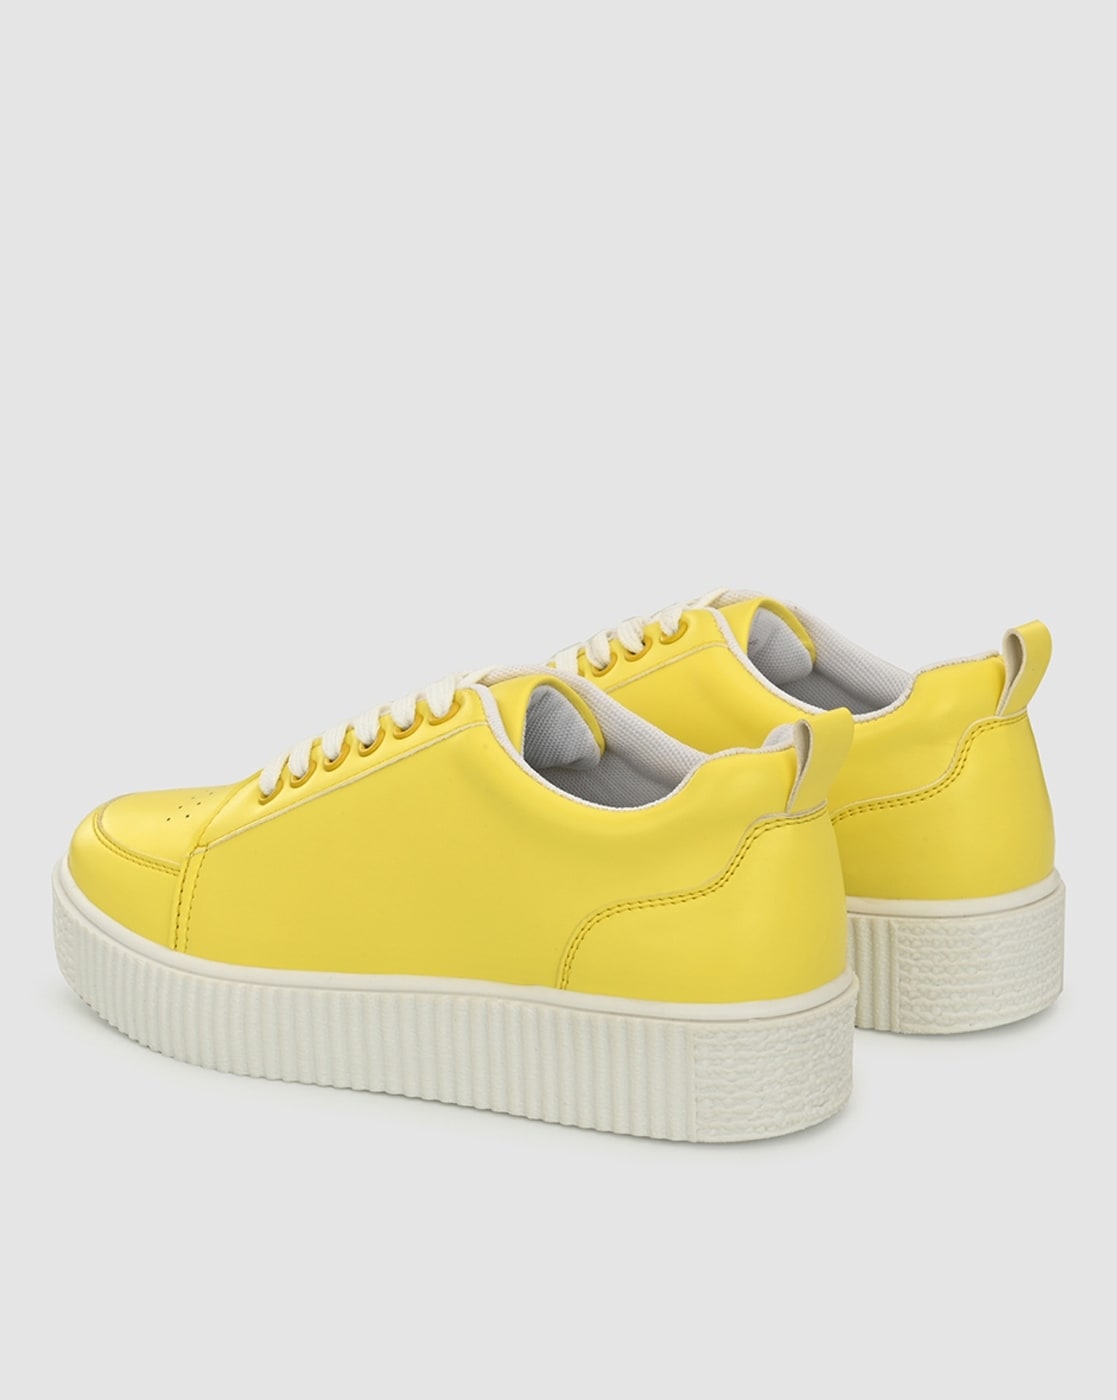 Buy Yellow Sneakers for Women by ADORLY Online | Ajio.com